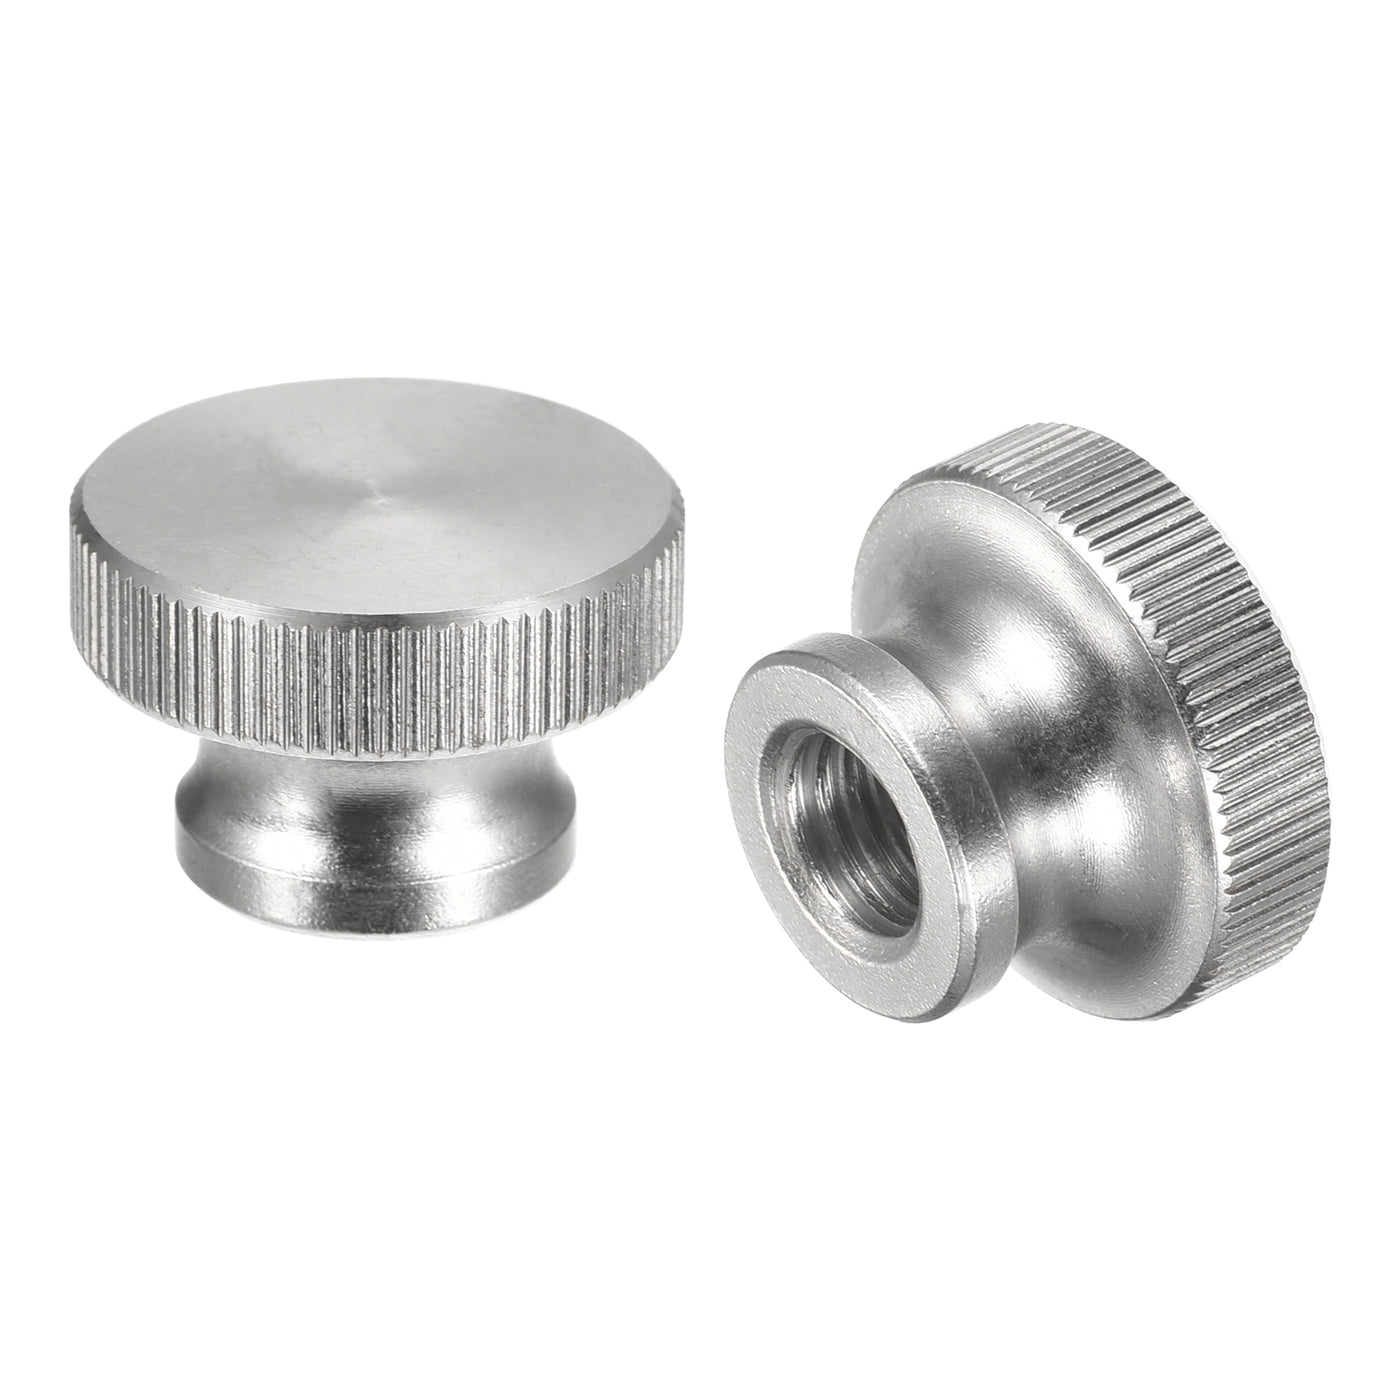 uxcell Uxcell Knurled Thumb Nuts, 2pcs M12 x D30mm x H20mm 304 Stainless Steel Blind Hole Nuts